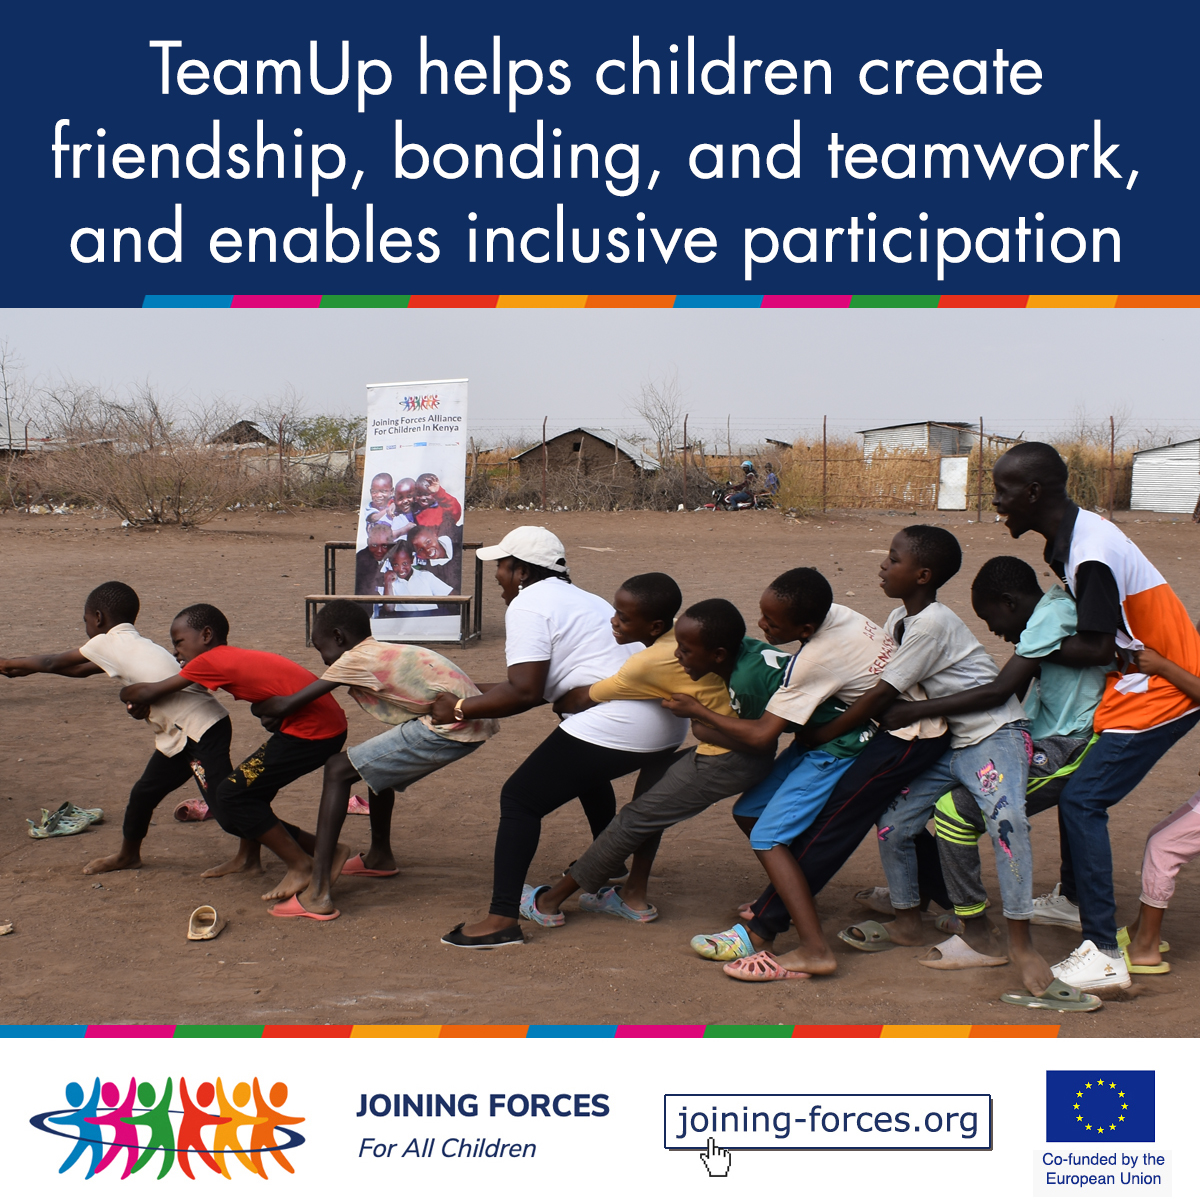 Joining Forces For Africa (JOFA) Project has spent two years teaming up with #Children in #Kenya🇰🇪and we're excited to see how the lives of thousands of children and families are changing. Learn more how TeamUp works: bit.ly/3ArhT2y #JOFA #JoiningForcesForAllChildren